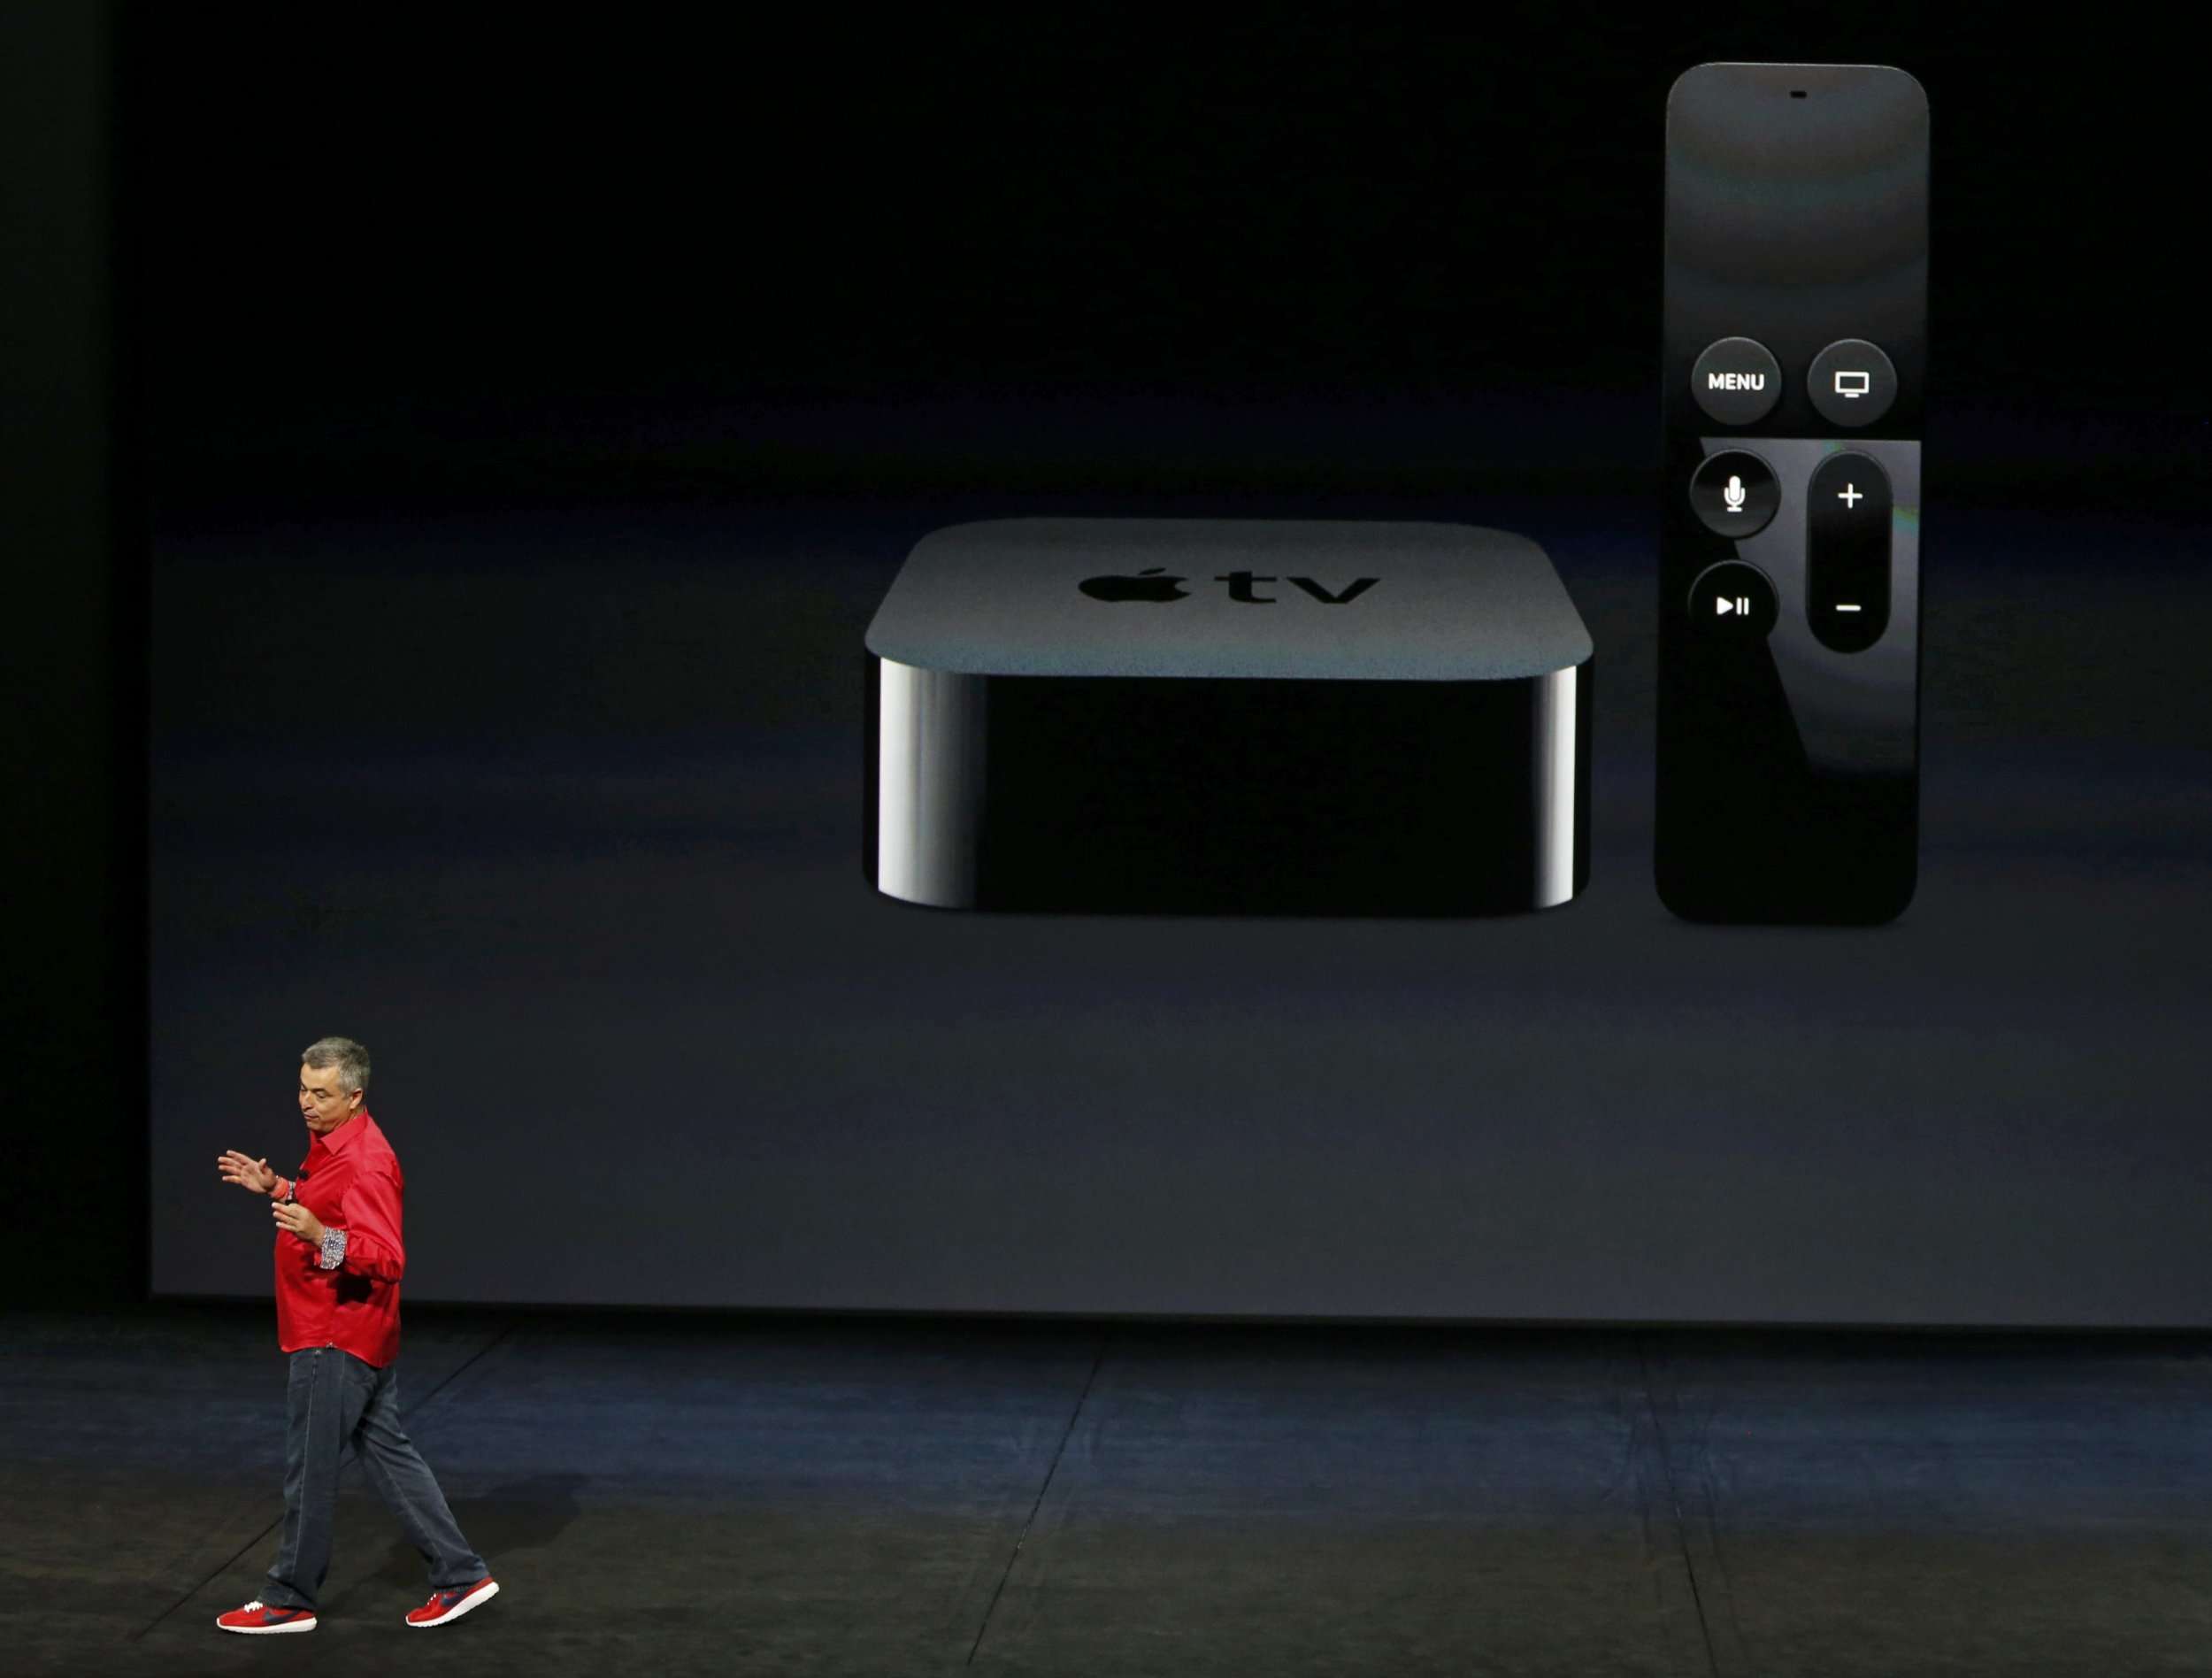 Apple Announces New Apple TV with Smarter Siri, Better Apps, New OS